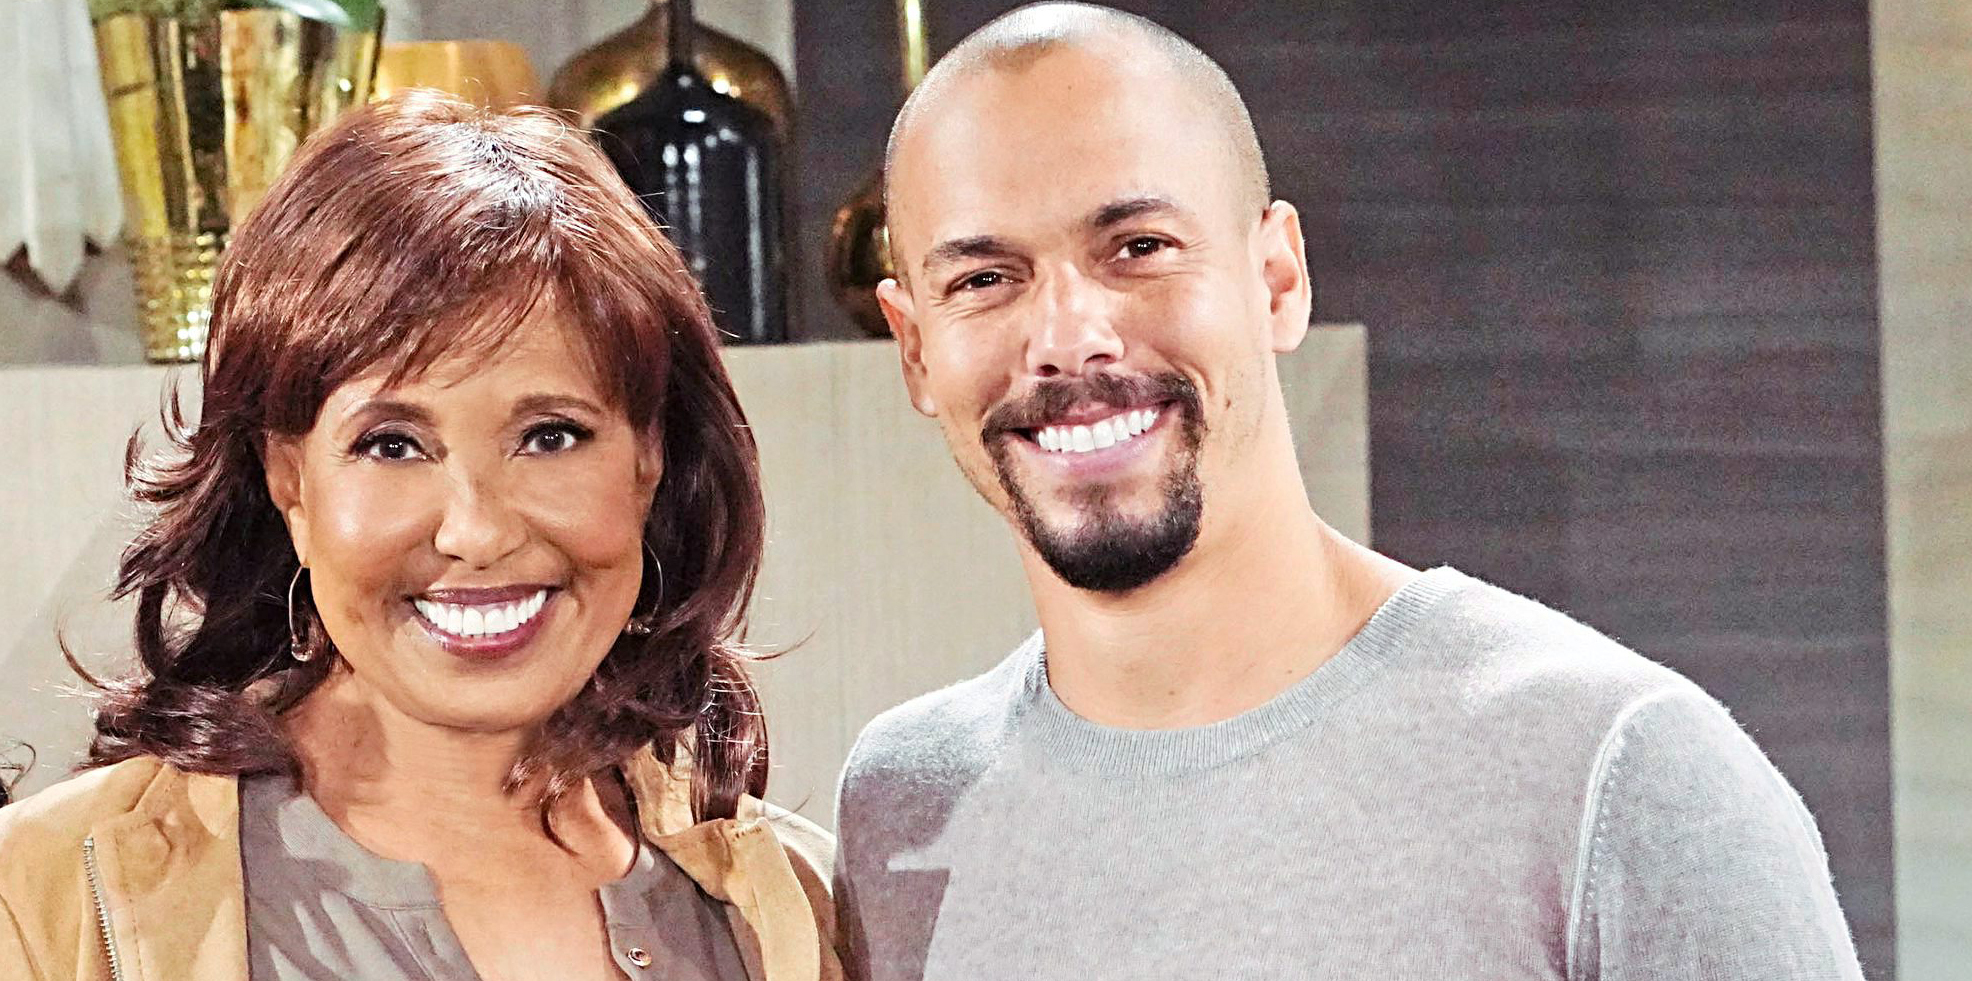 The Young and the Restless' Star Bryton James' Father Worked With Kenny  Rogers